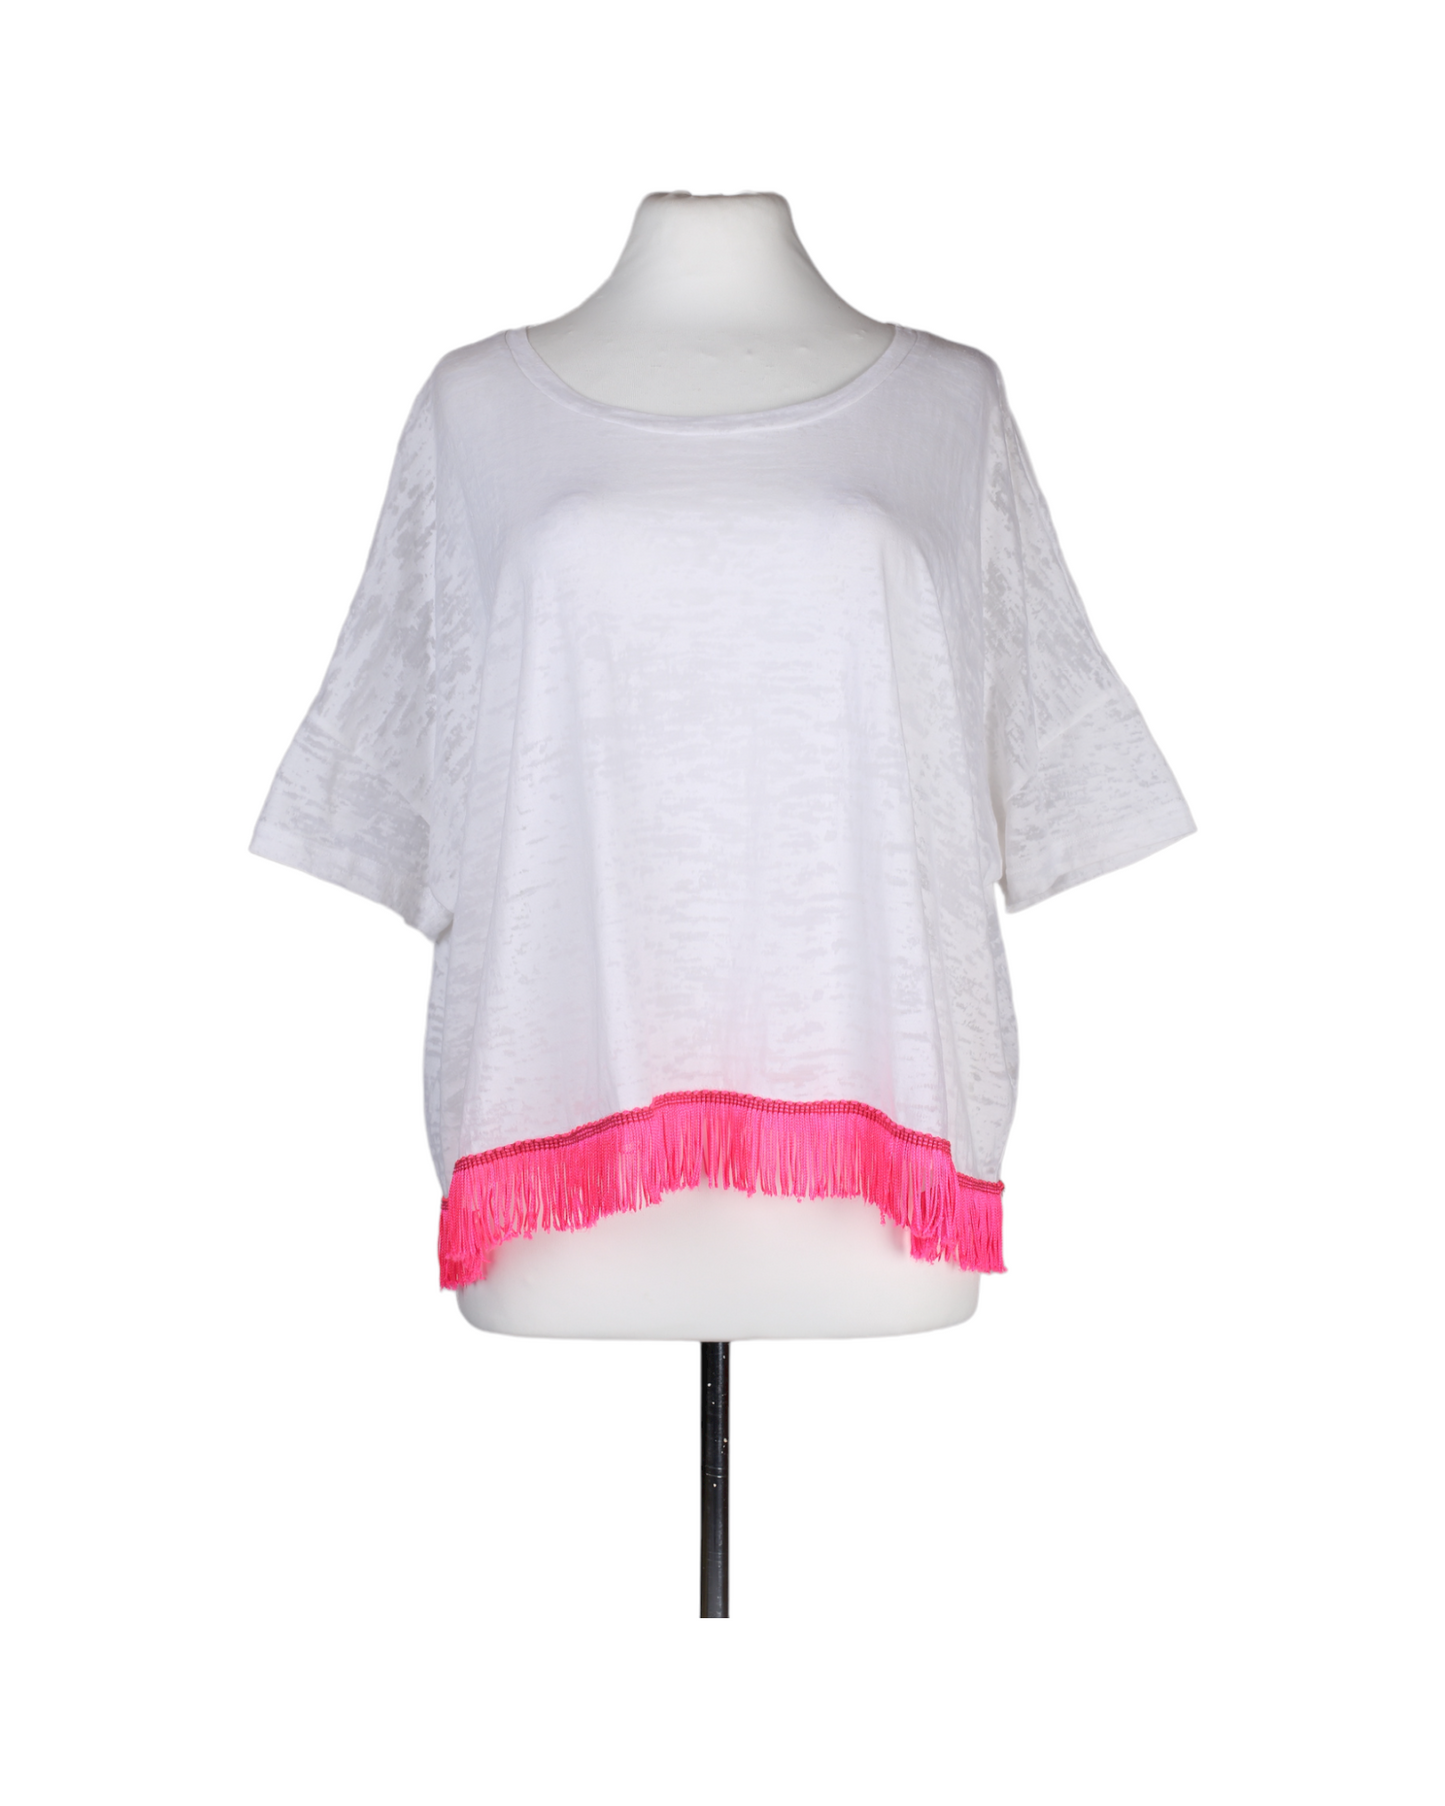 White T-Shirt With Neon Pink Fringes